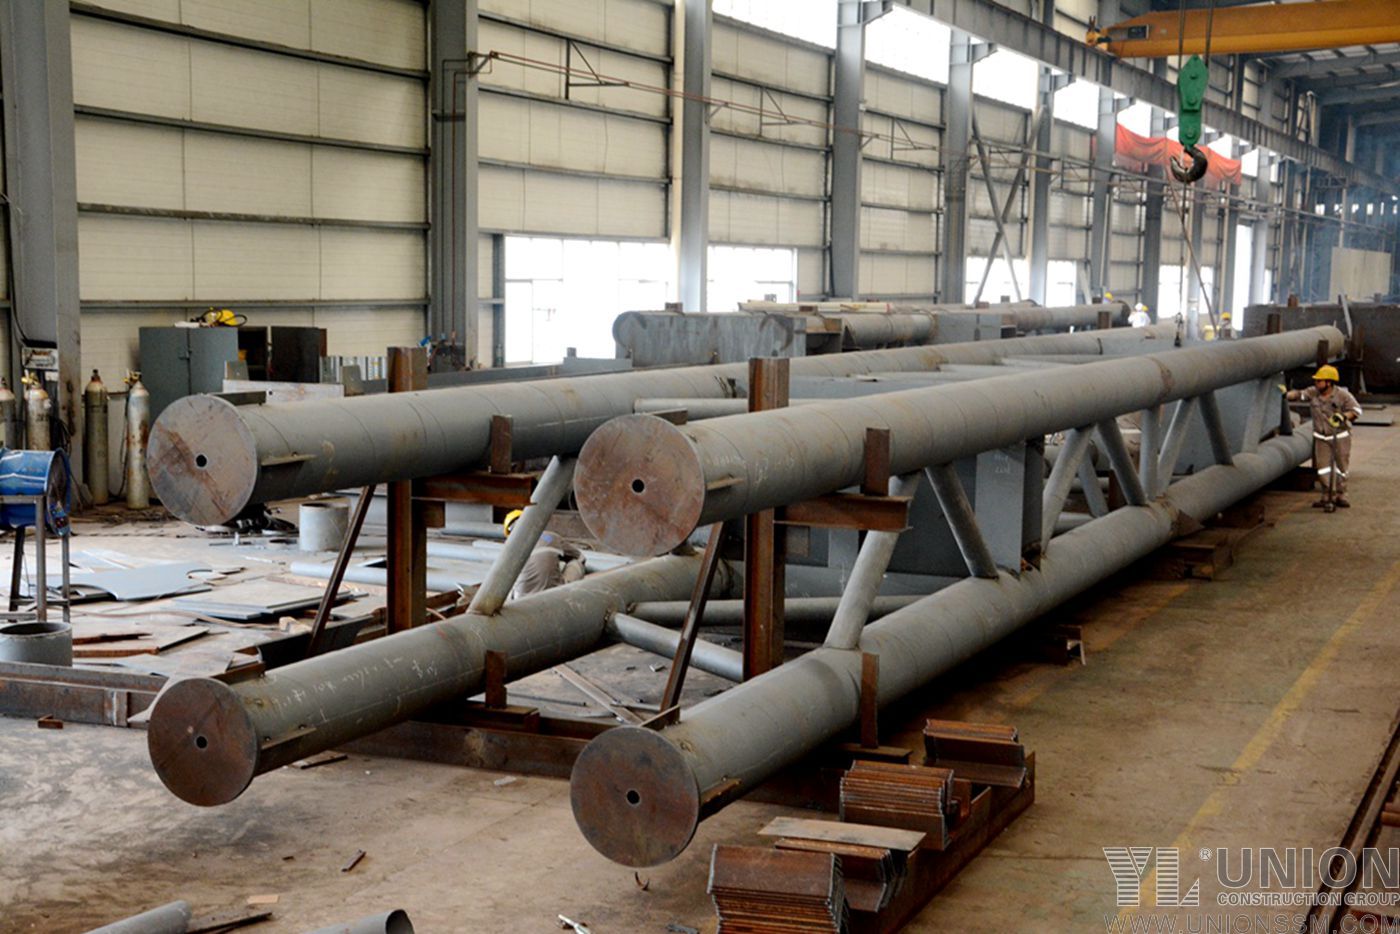 Pipe Truss - Steel Columns and Beams Fabrication